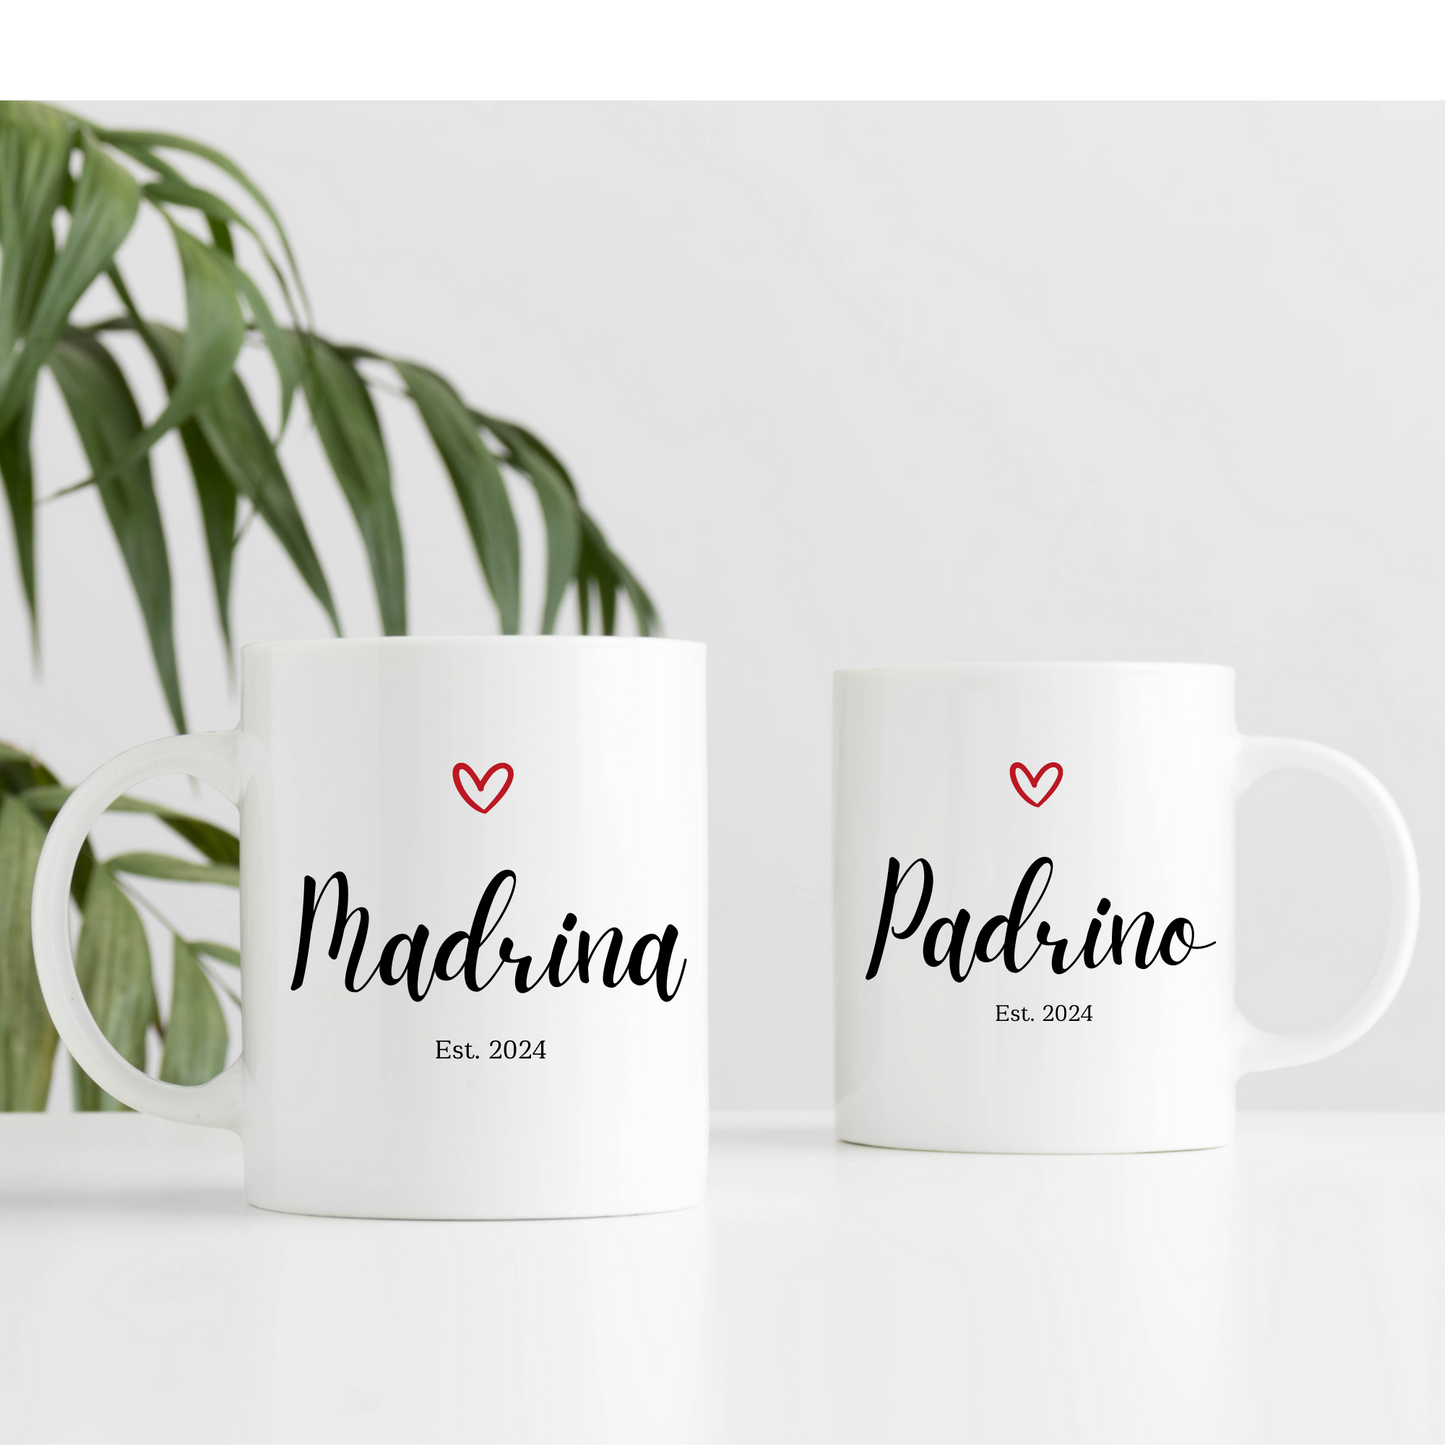 Godparent Proposal with Personalized Mugs